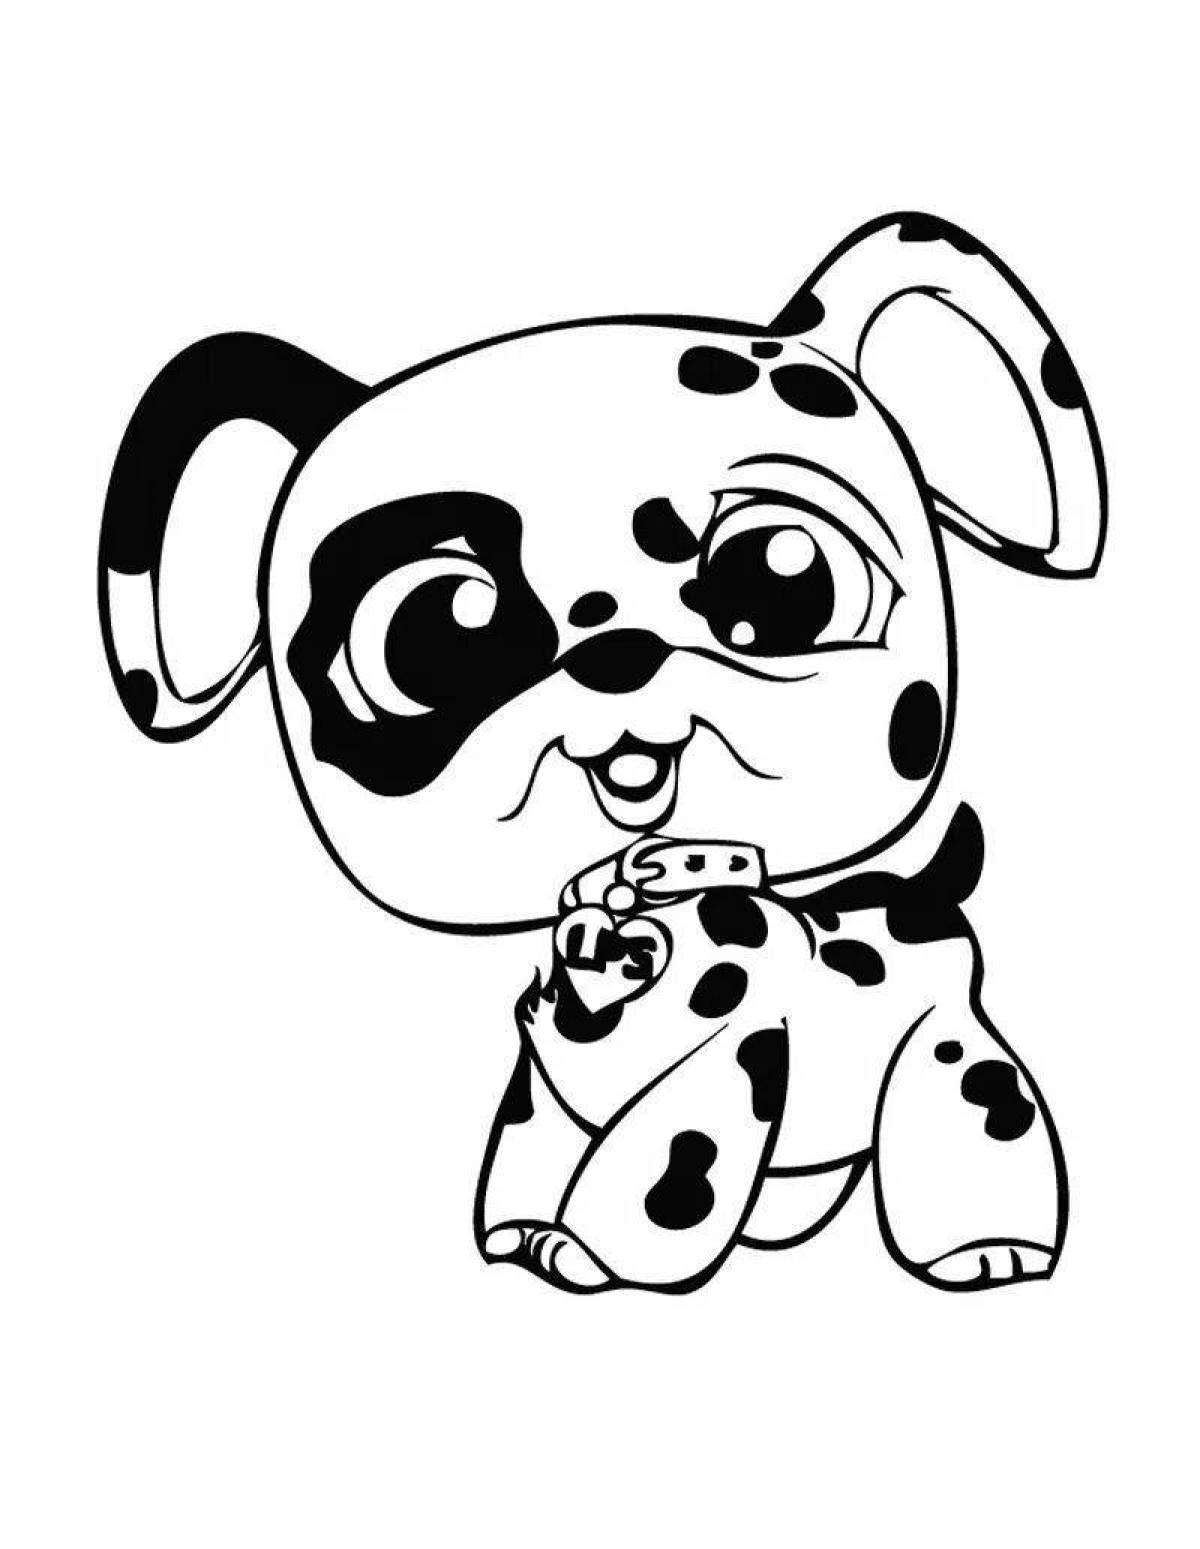 Cute dog coloring pages for girls